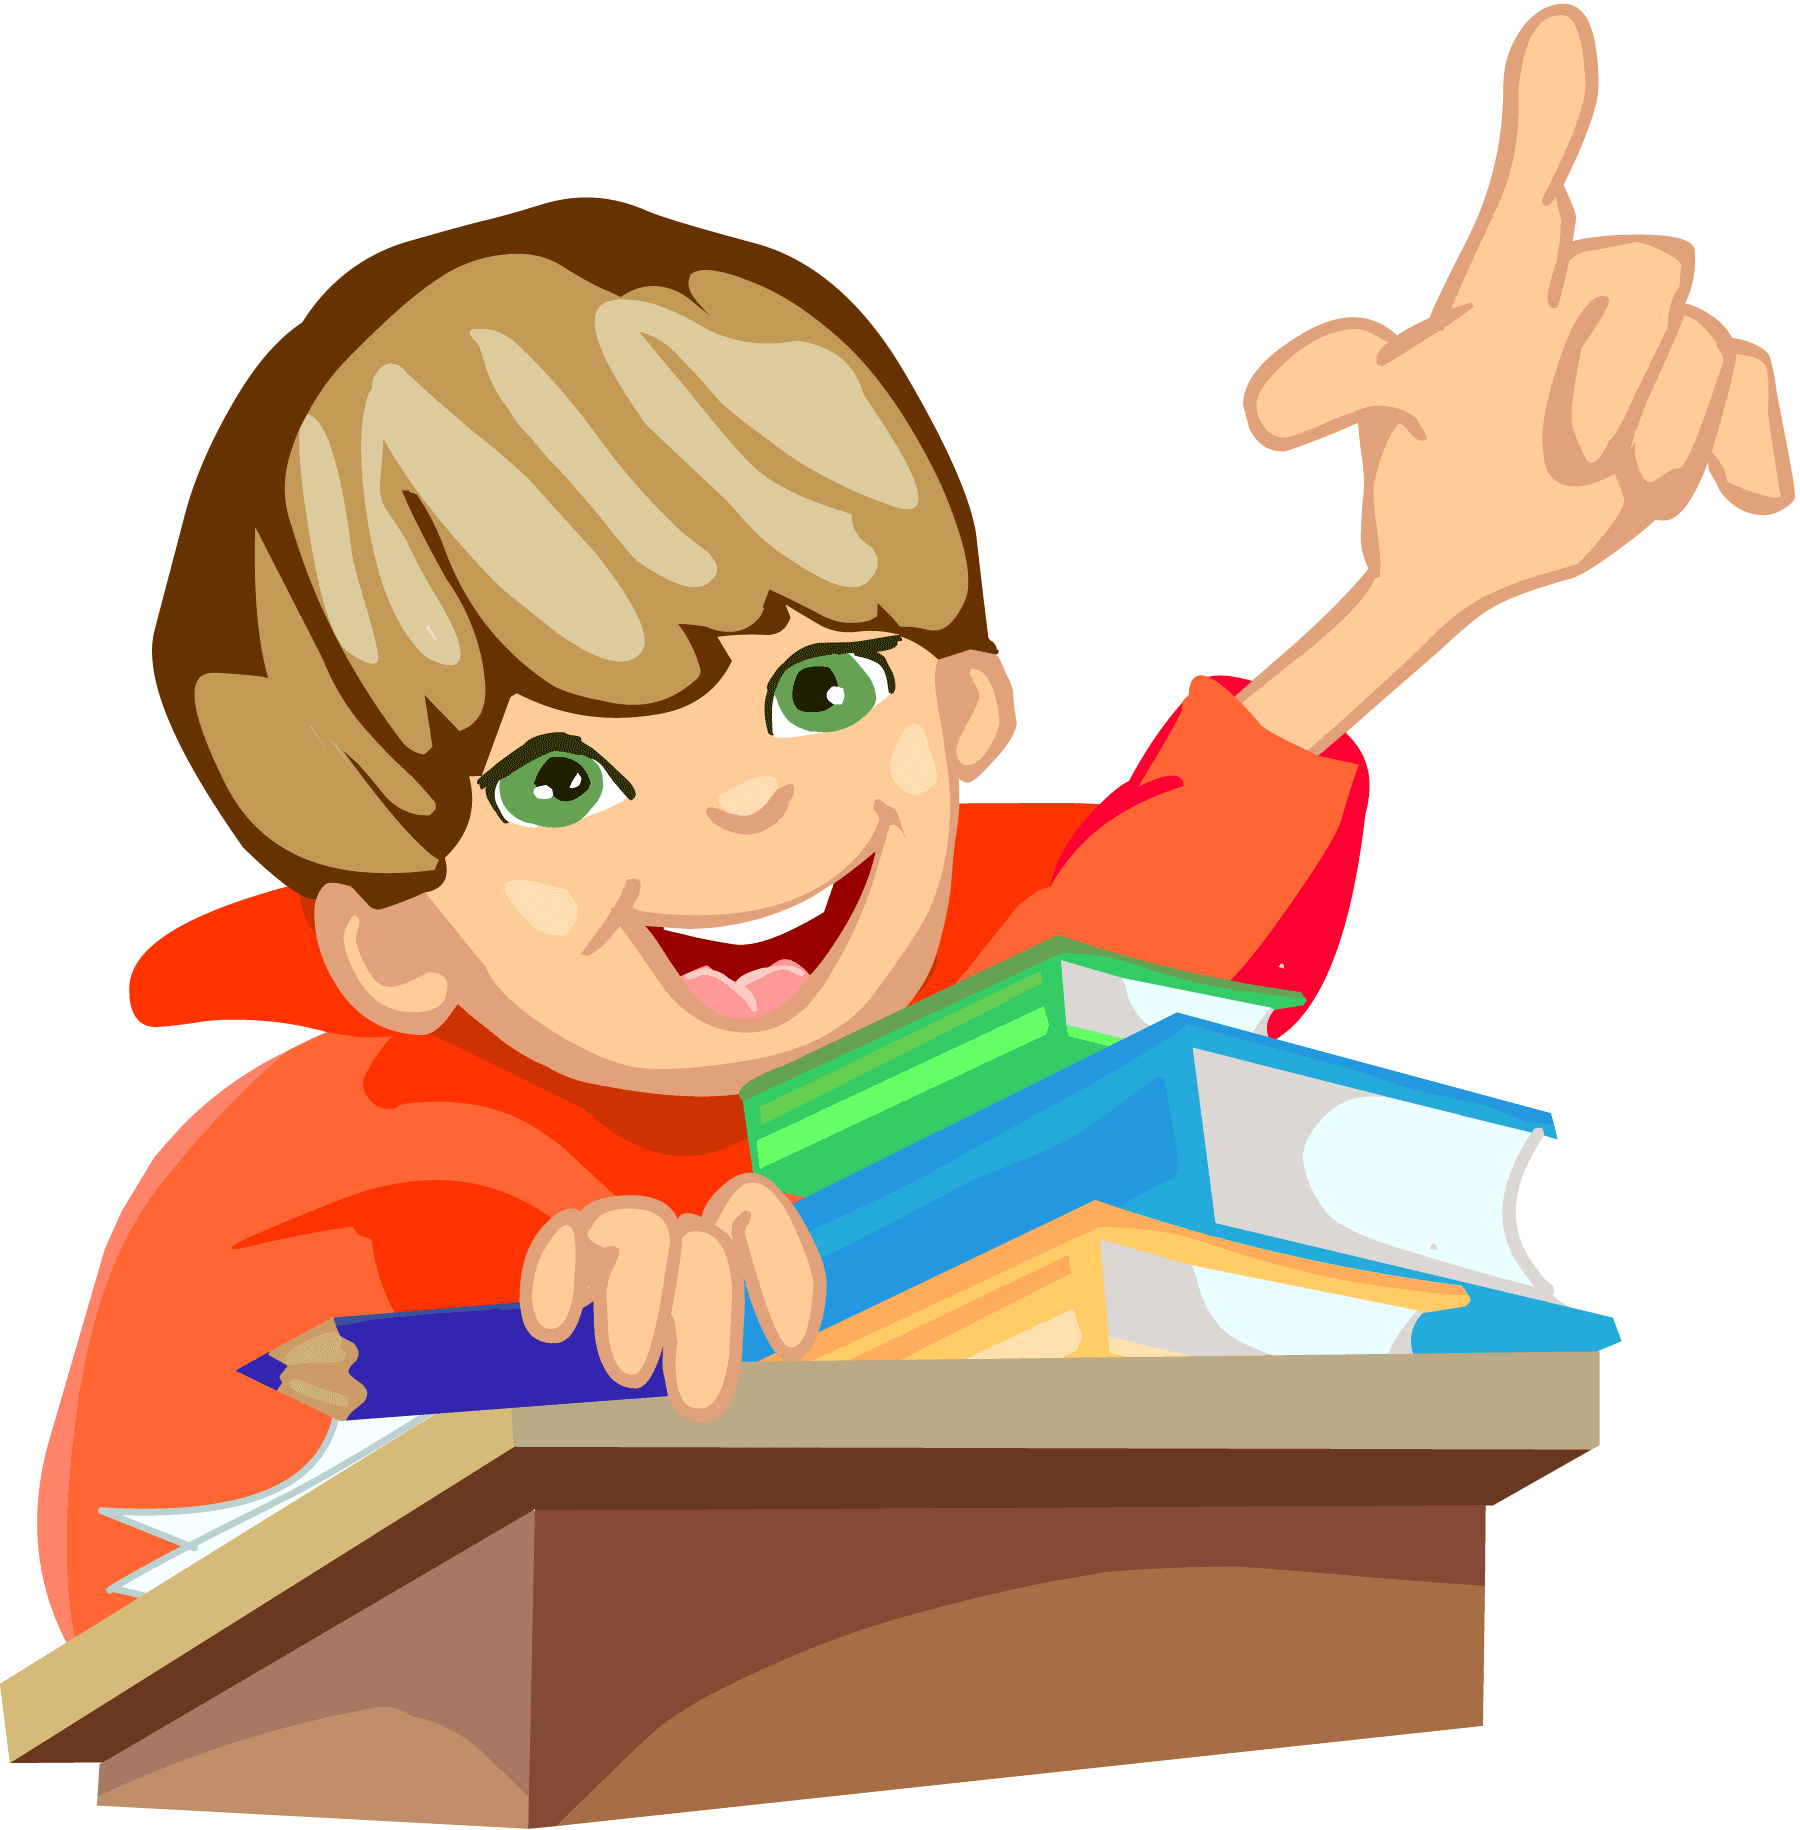 Animated Classroom Clipart | Free Download Clip Art | Free Clip ... -  ClipArt Best - ClipArt Best